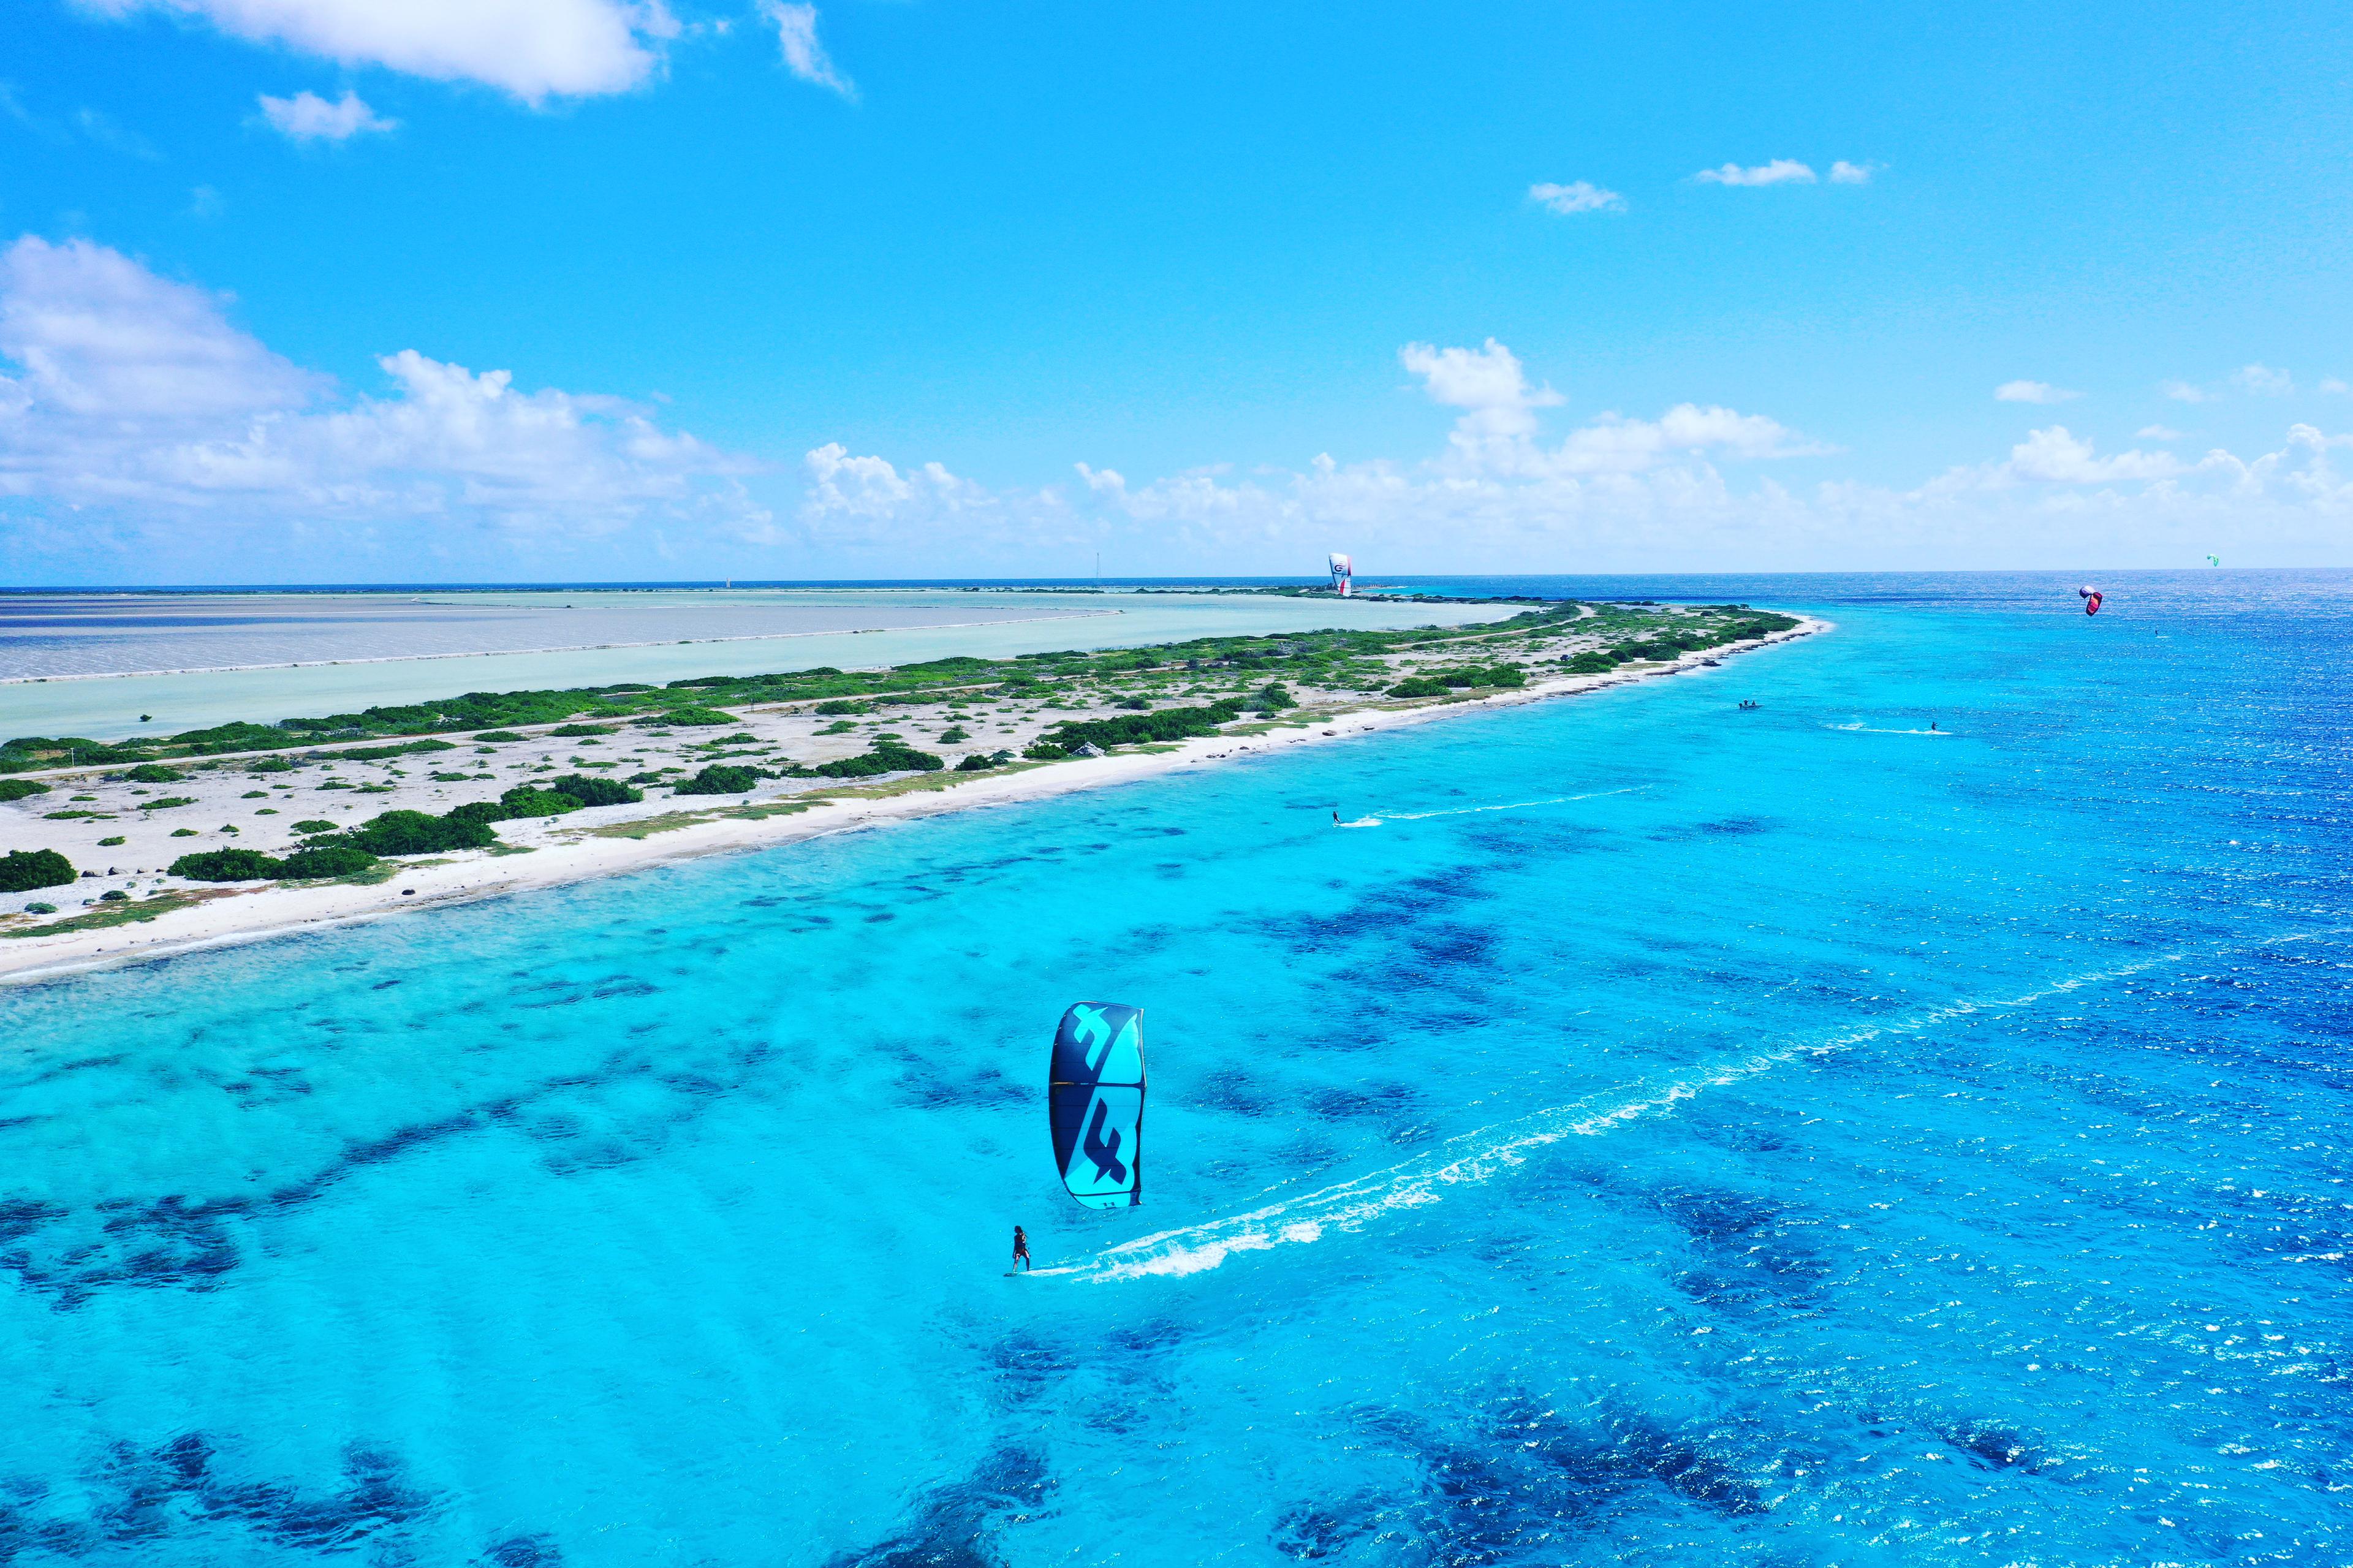 Go kitesurfing on the flattest water with good wind and noone on the water.